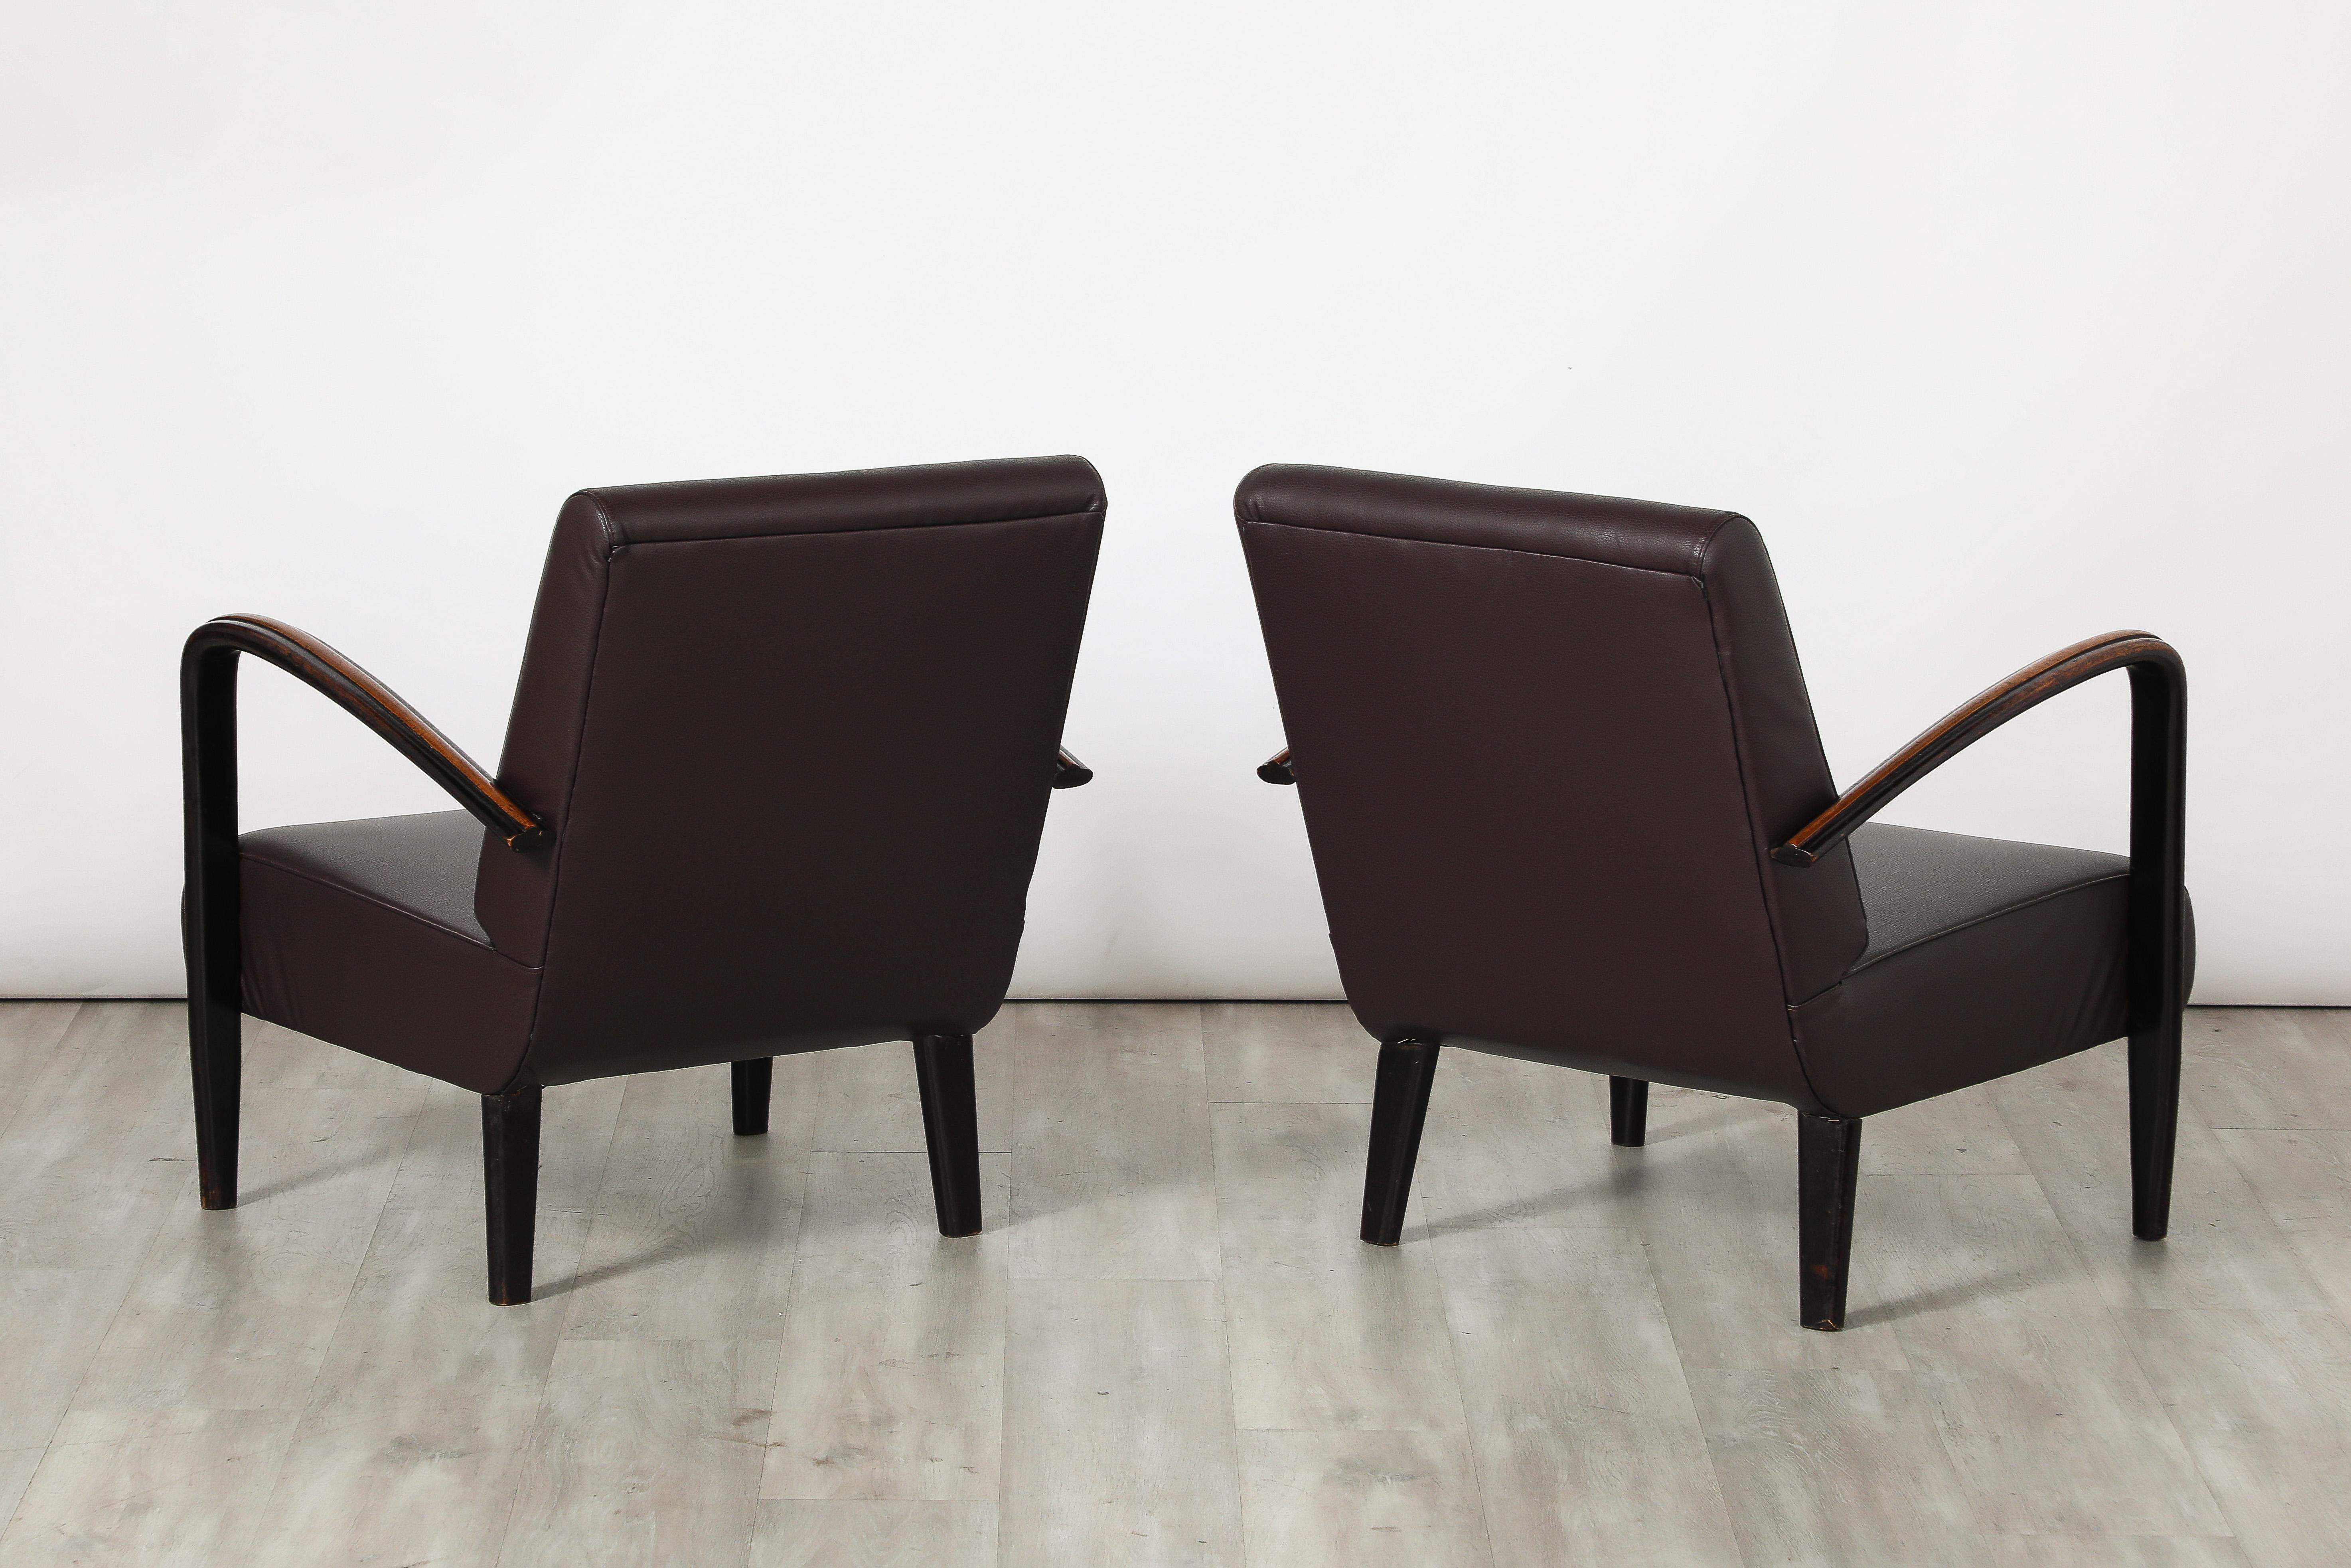 Pair of Italian Modernist Lounge Chairs, Italy, circa 1940 For Sale 3